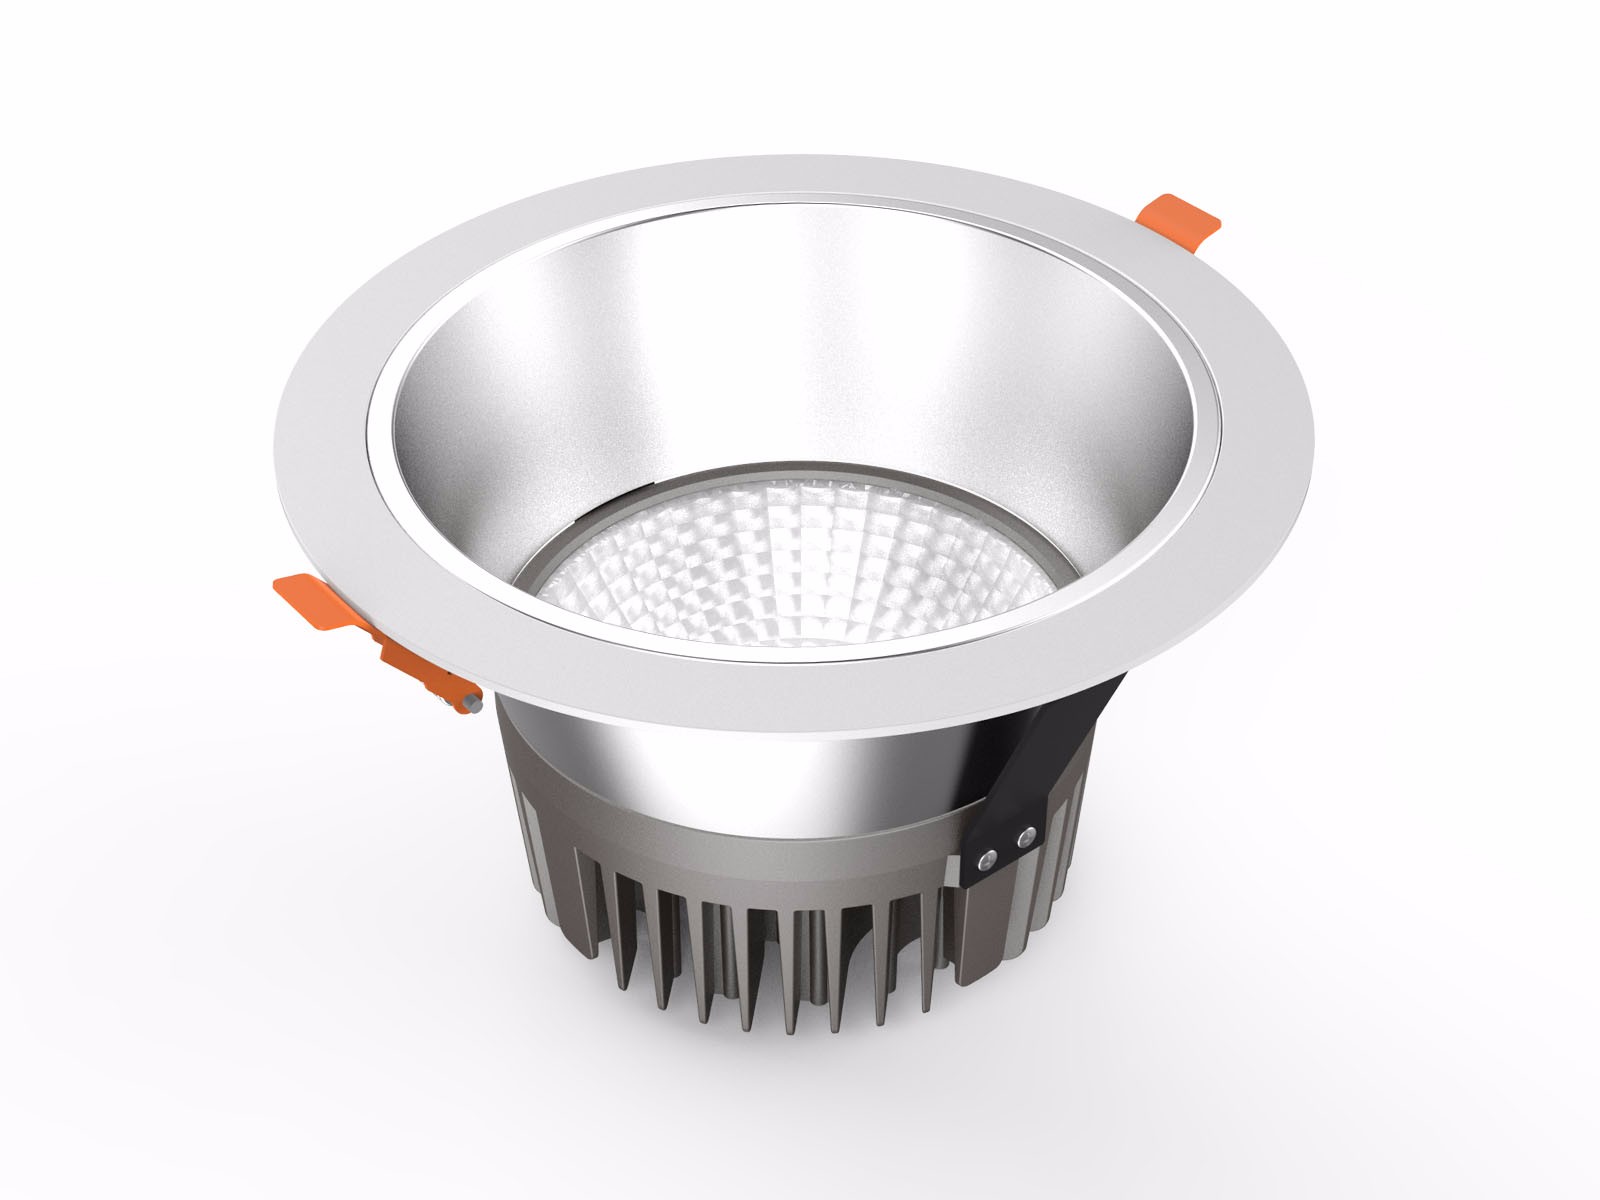 CL94 2 Heat Dissipating LED Downlight